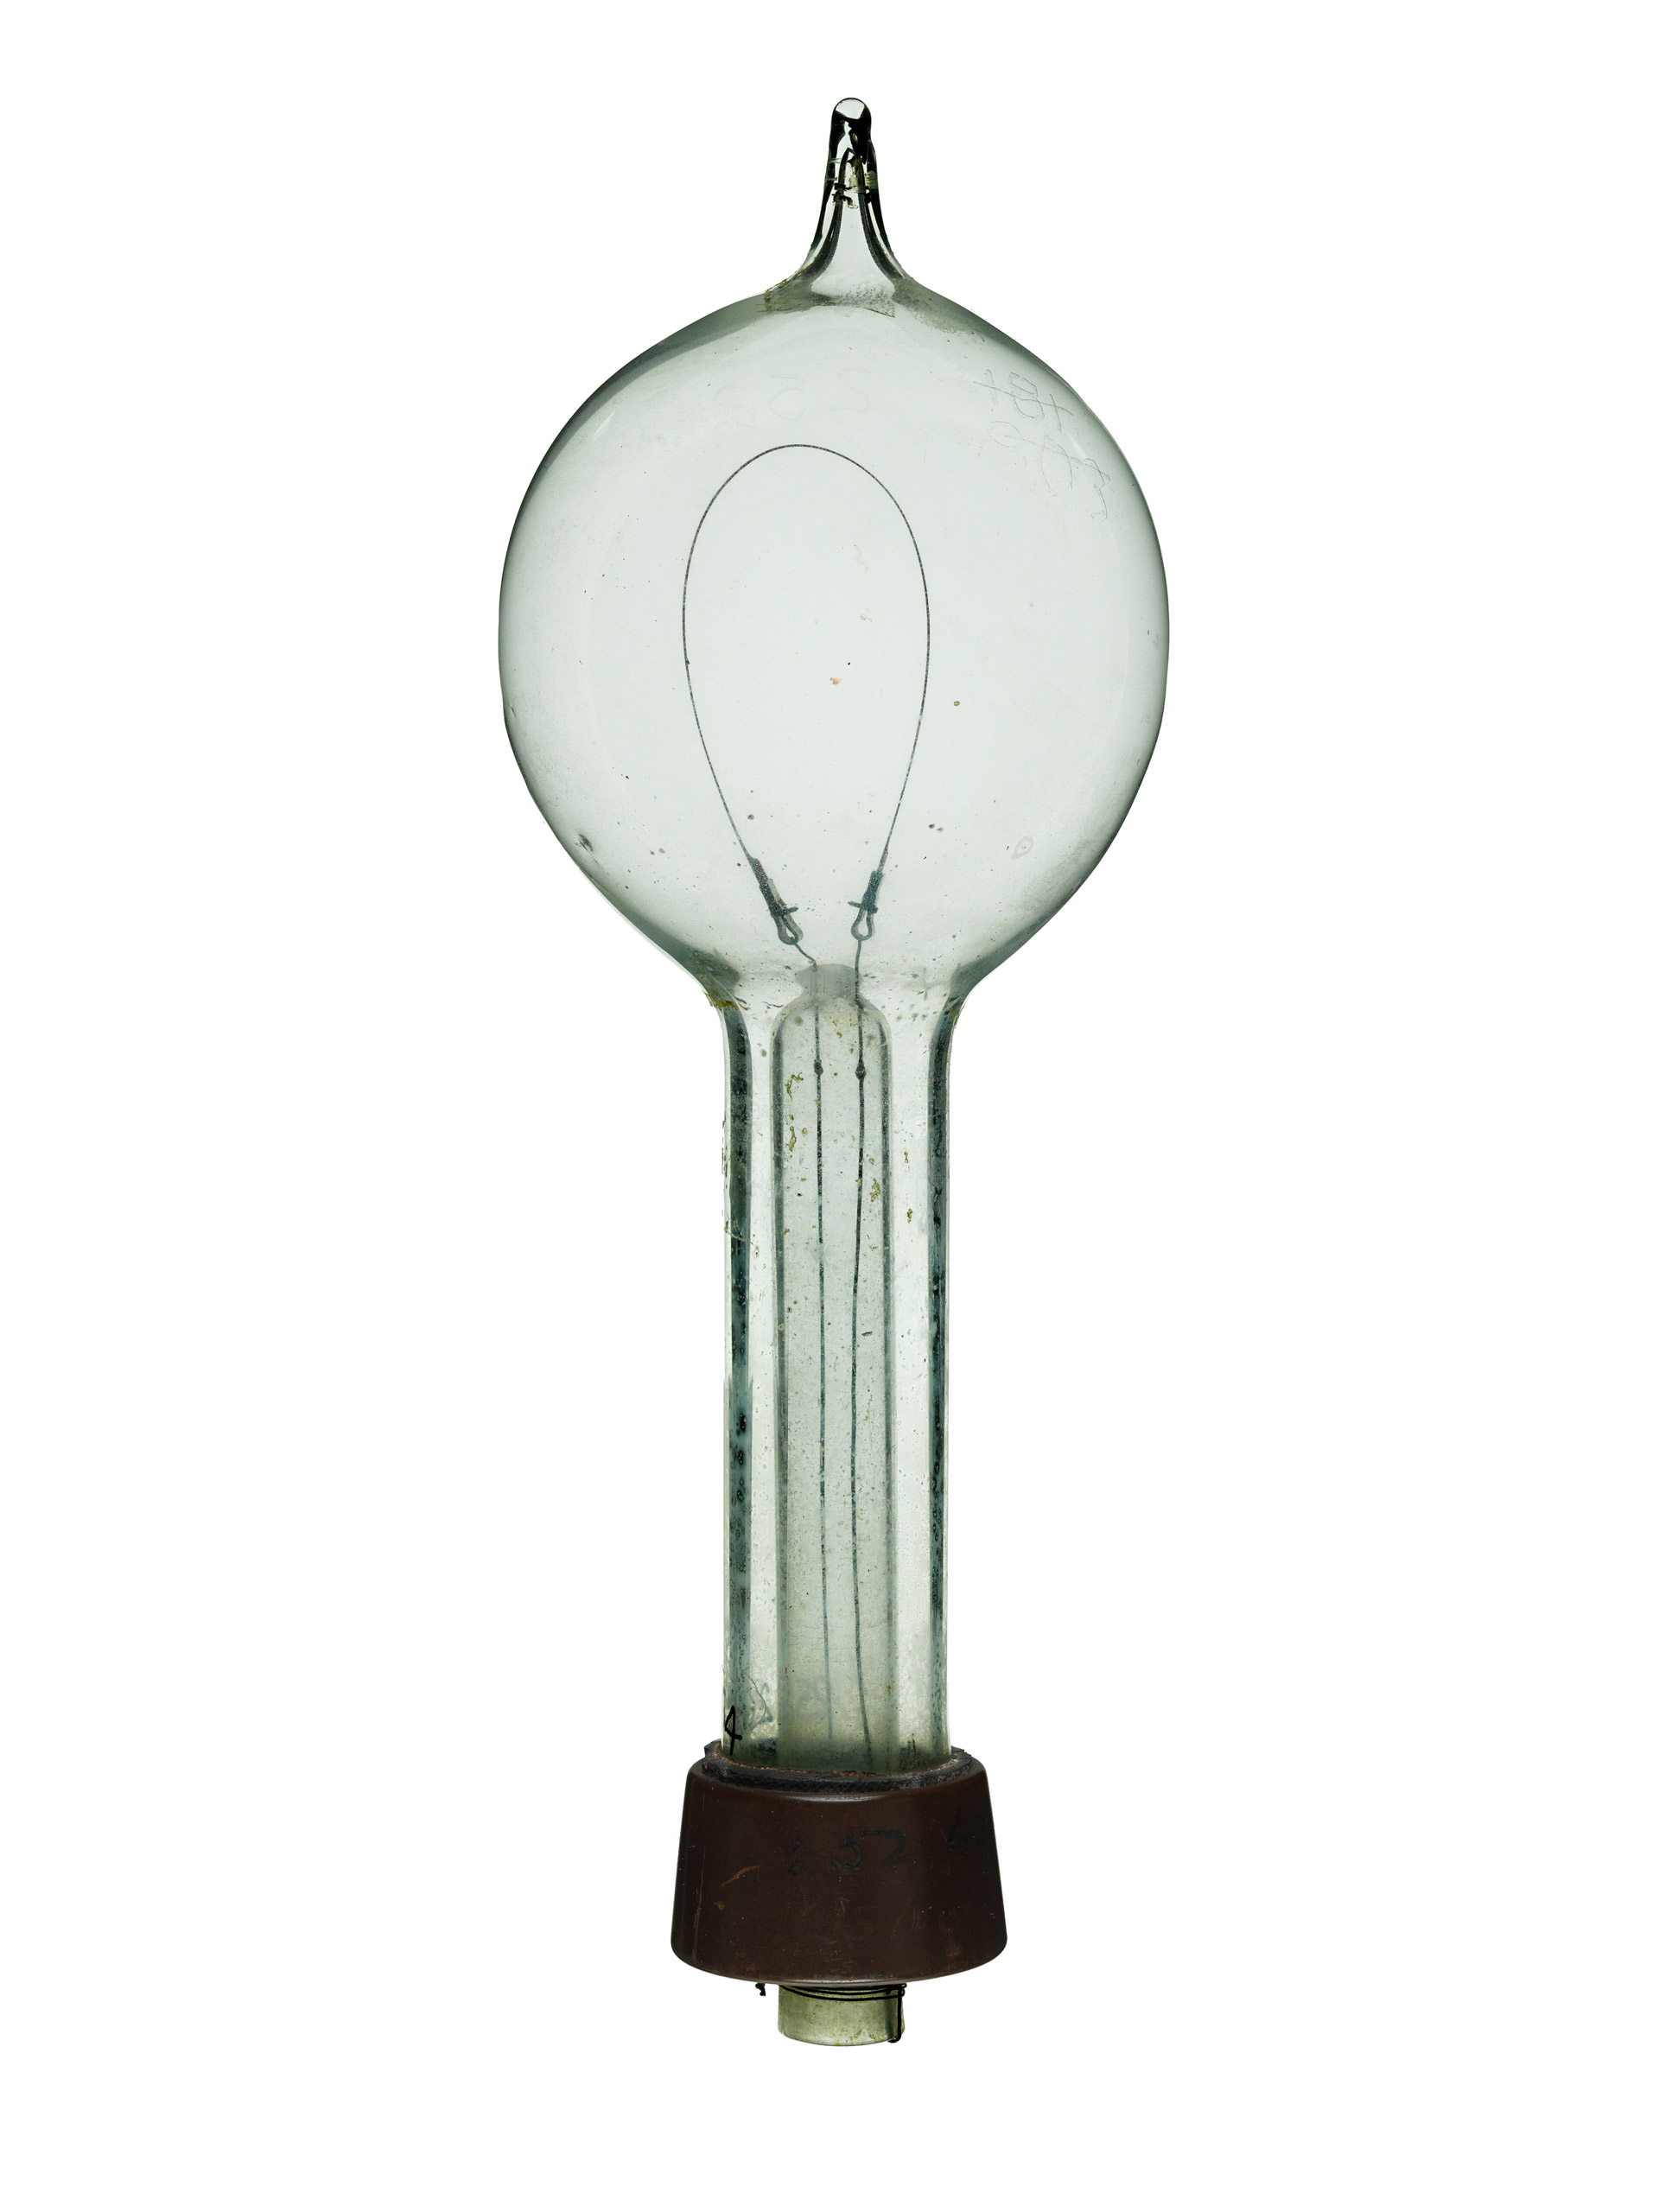 Incandescent Lamp, 1881: Thomas Edison (Patent No. 239373) Thomas Edison submitted this model to patent a variation on his newly invented light bulb. Although he never put this design into production, this lamp could be disassembled to replace a burned-out filament.